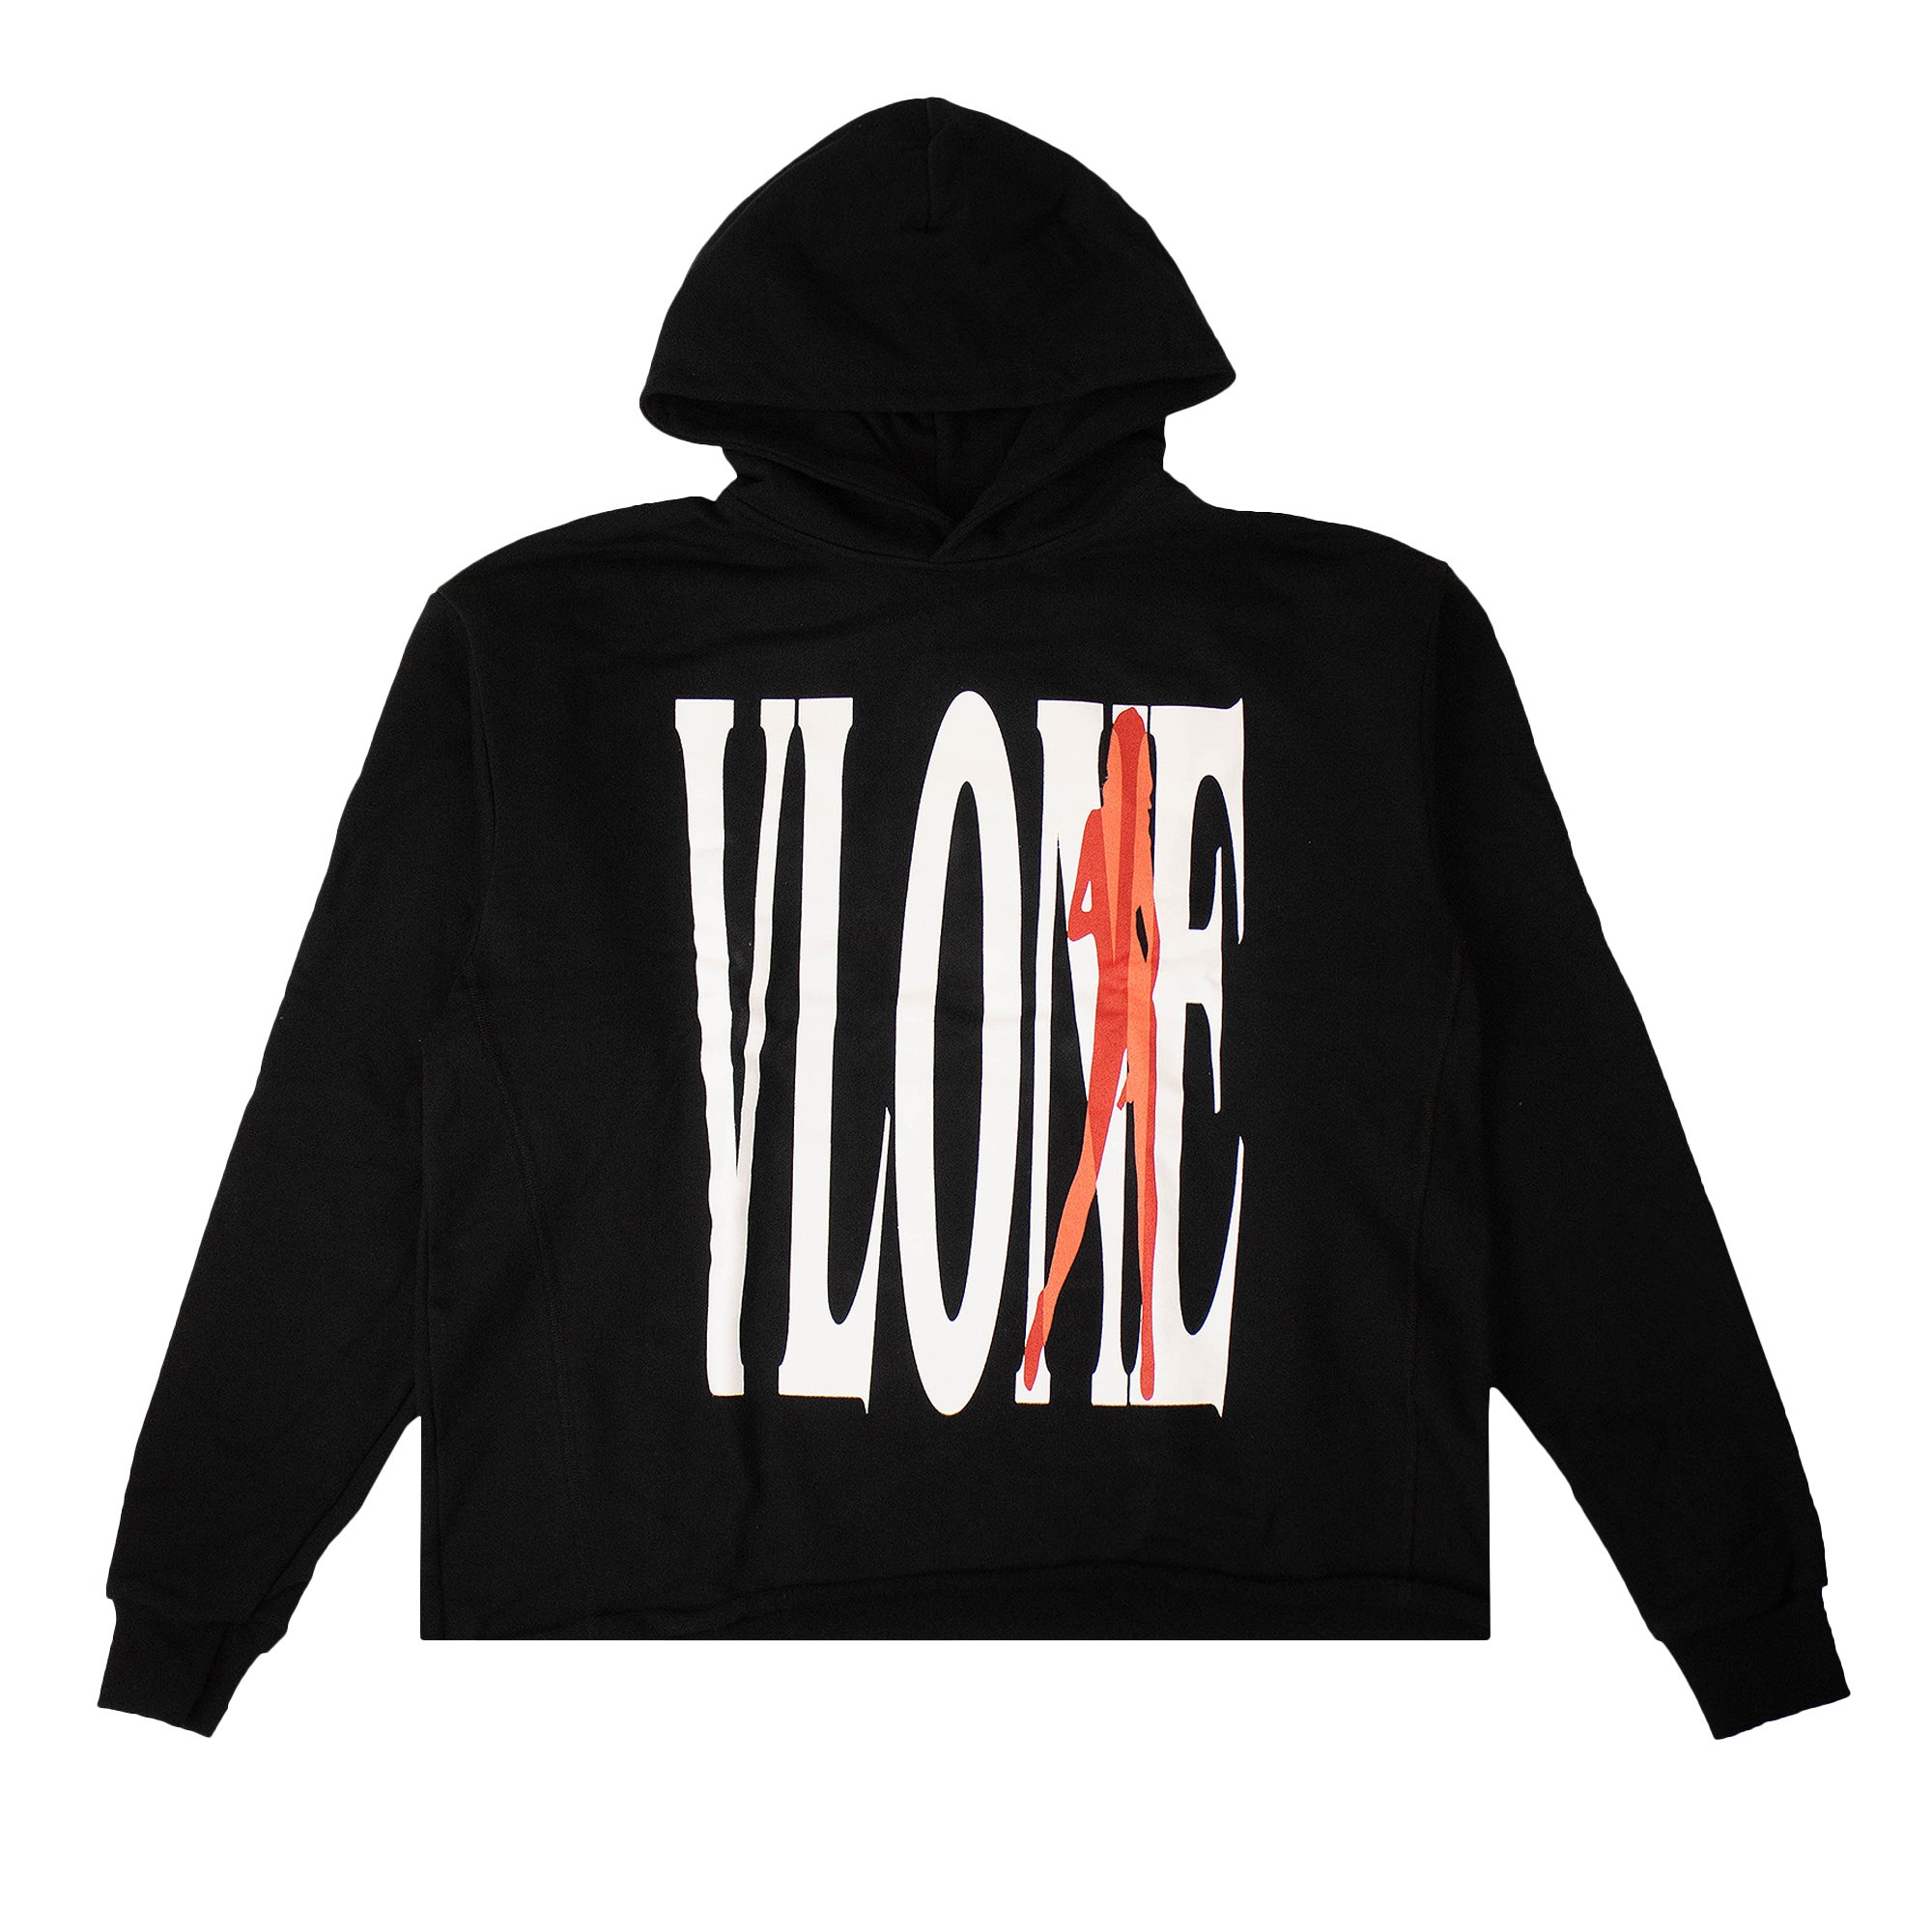 Толстовка Vlone Vice City Черная 2021 men s 3d hoodie black hoodie and red stitching with flame c letter cool outdoor flame print hoodie